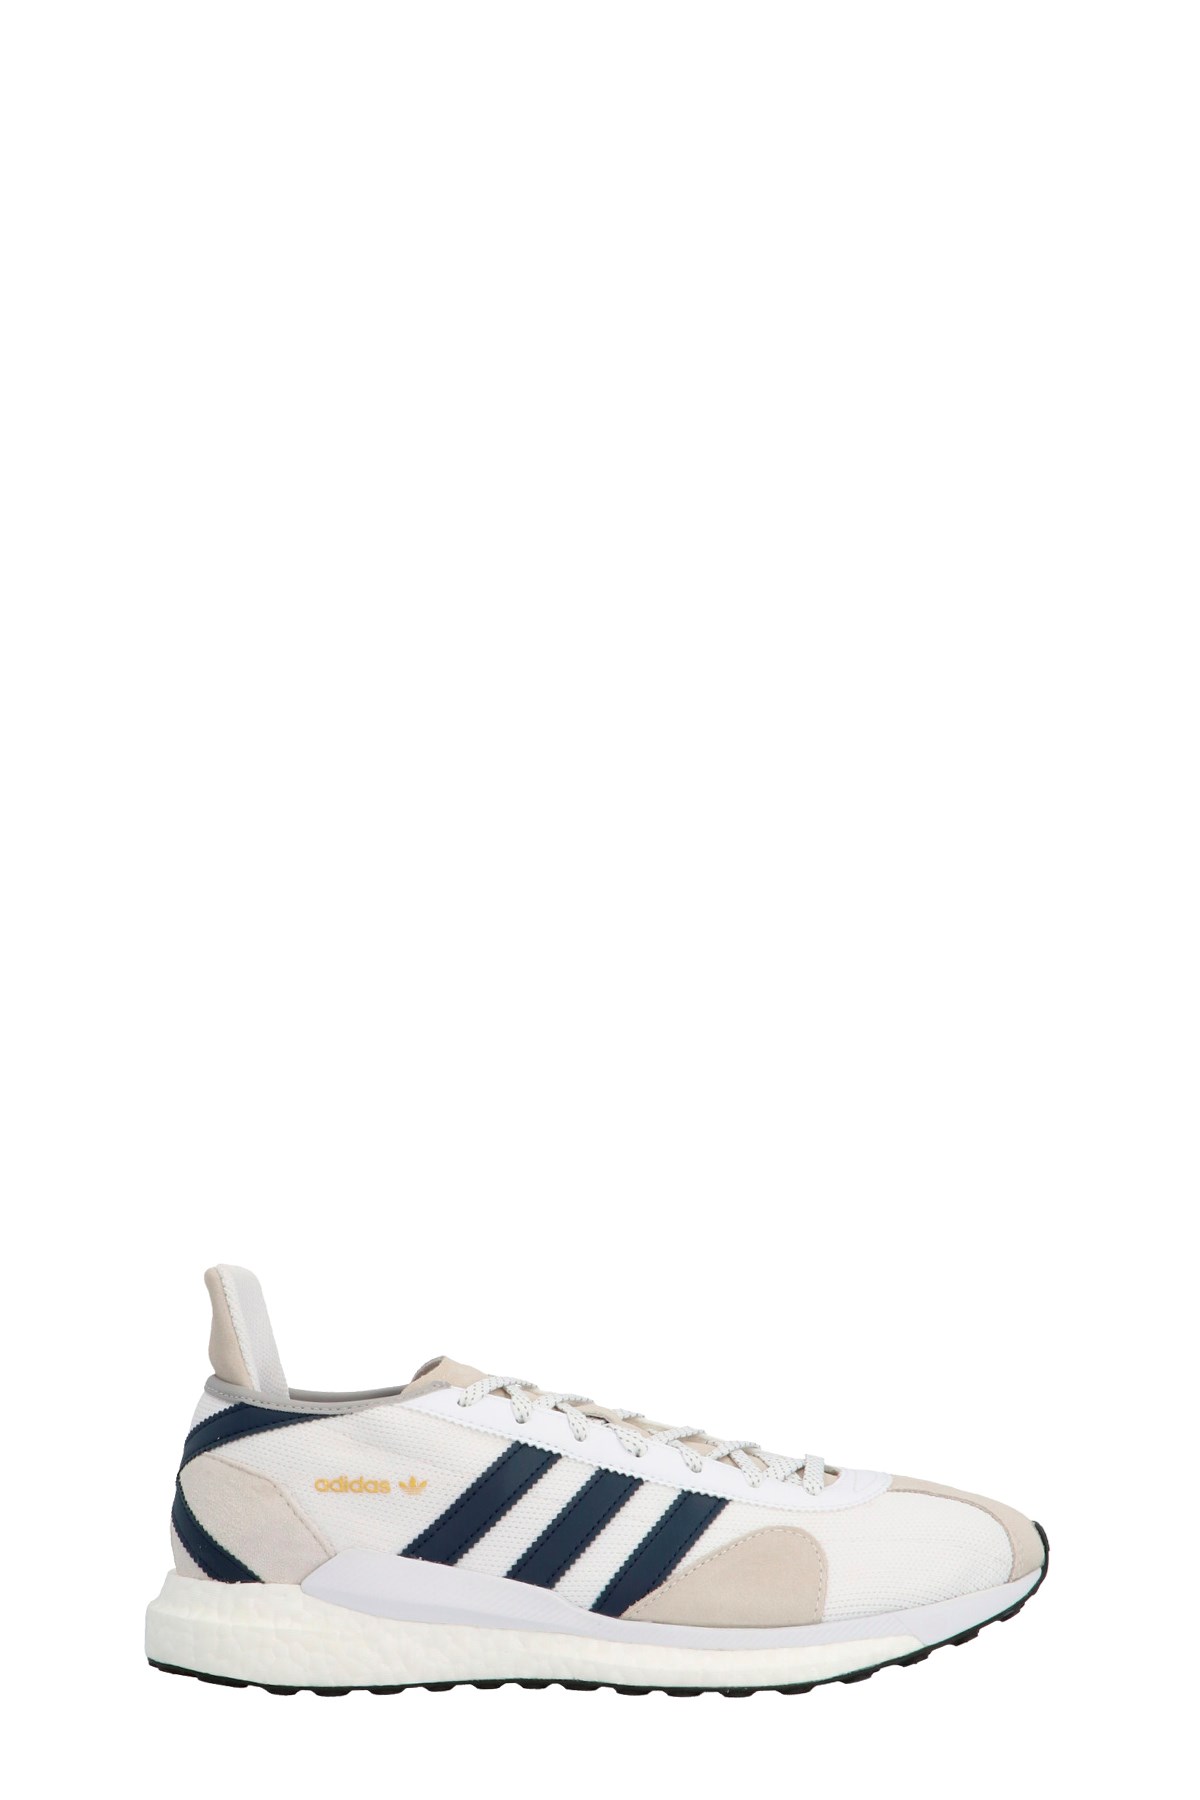 ADIDAS STATEMENT Human Made Collab. 'Tokyo Solar Hm' Sneakers